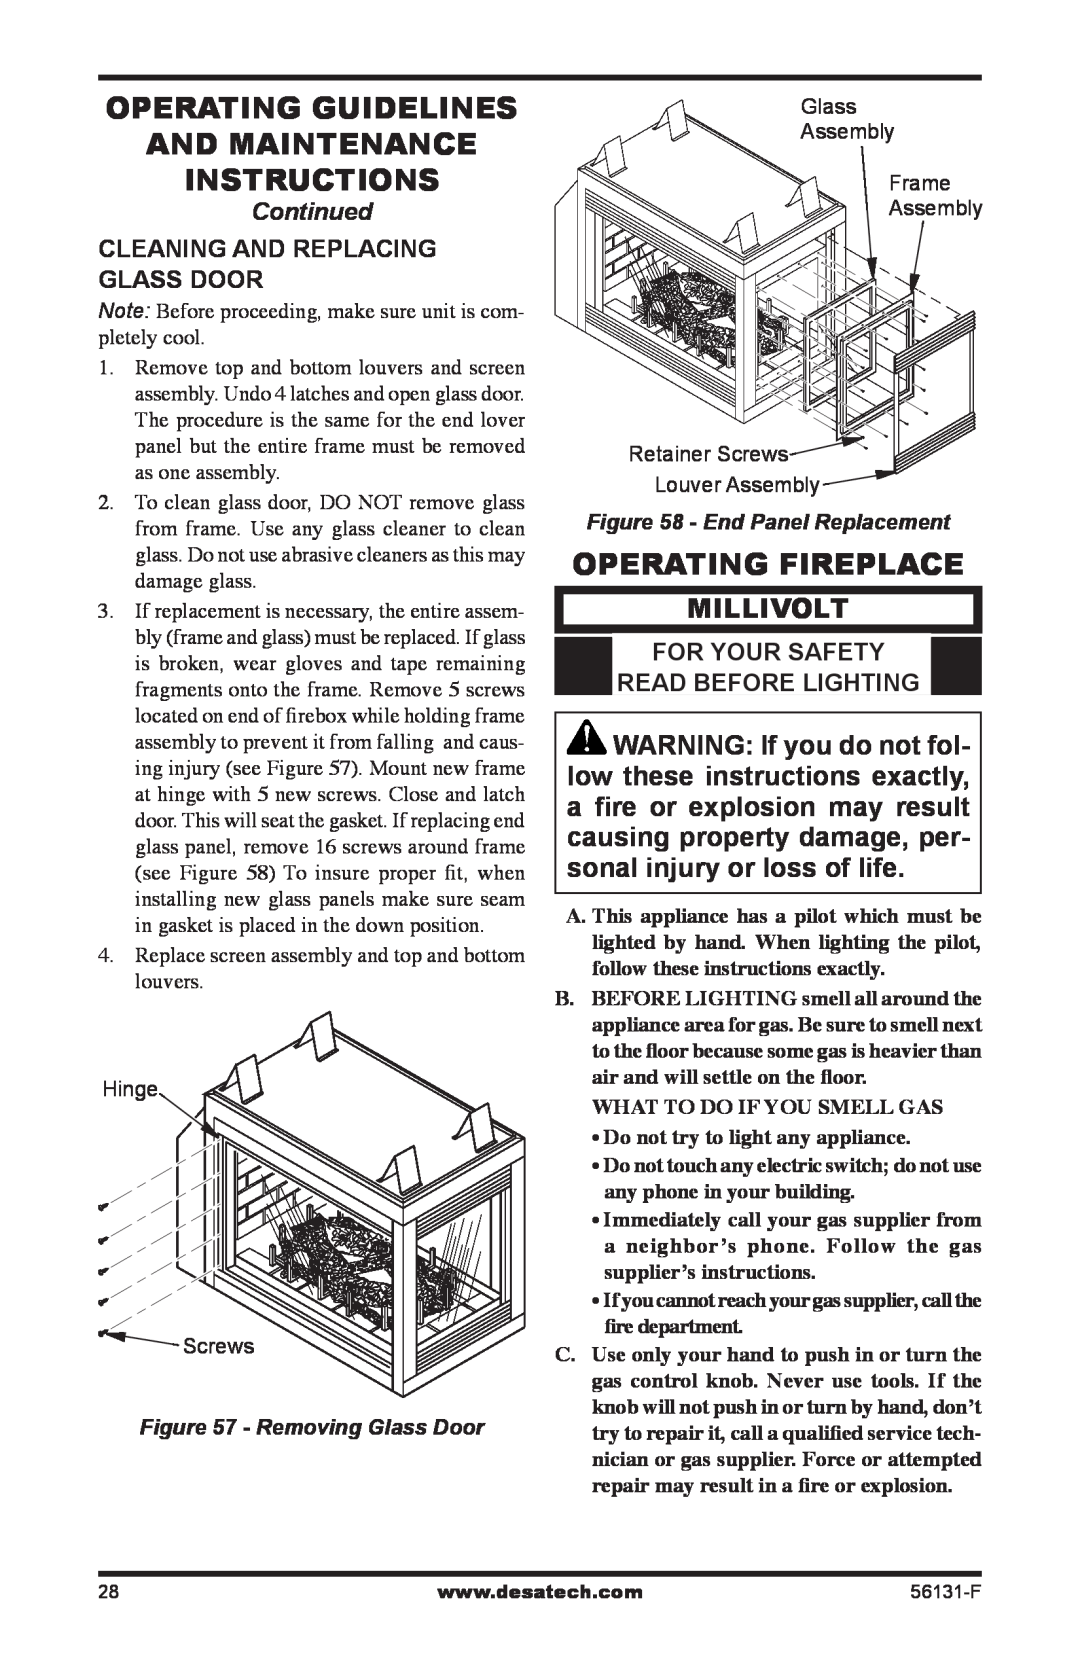 Desa TSTPA-A, (V)DVF36 Operating Guidelines And Maintenance Instructions, Operating Fireplace, Millivolt, Continued 